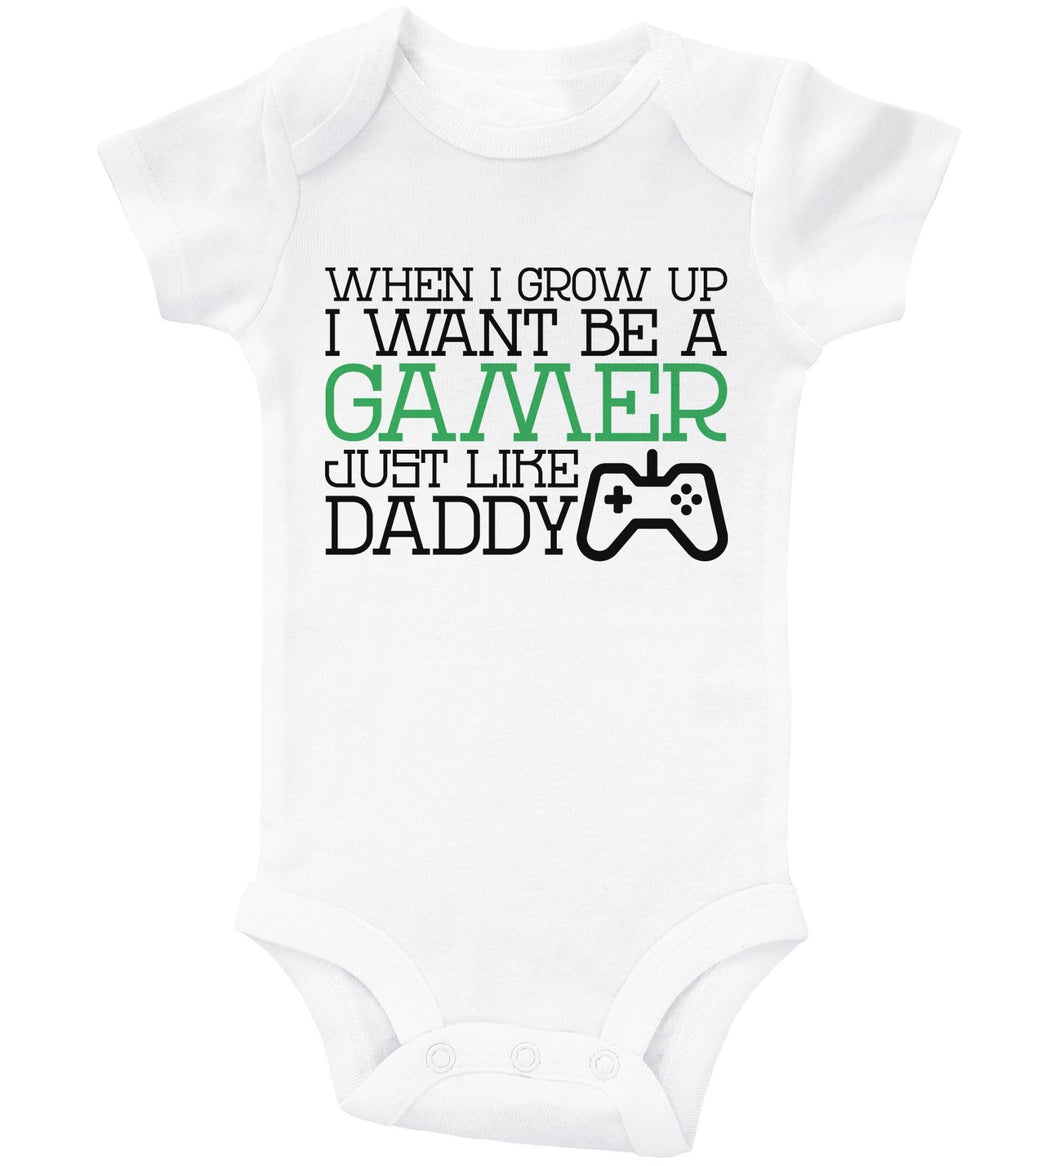 When I Grow Up I Want to Be A Gamer Like Daddy - Basic Onesie - Baffle